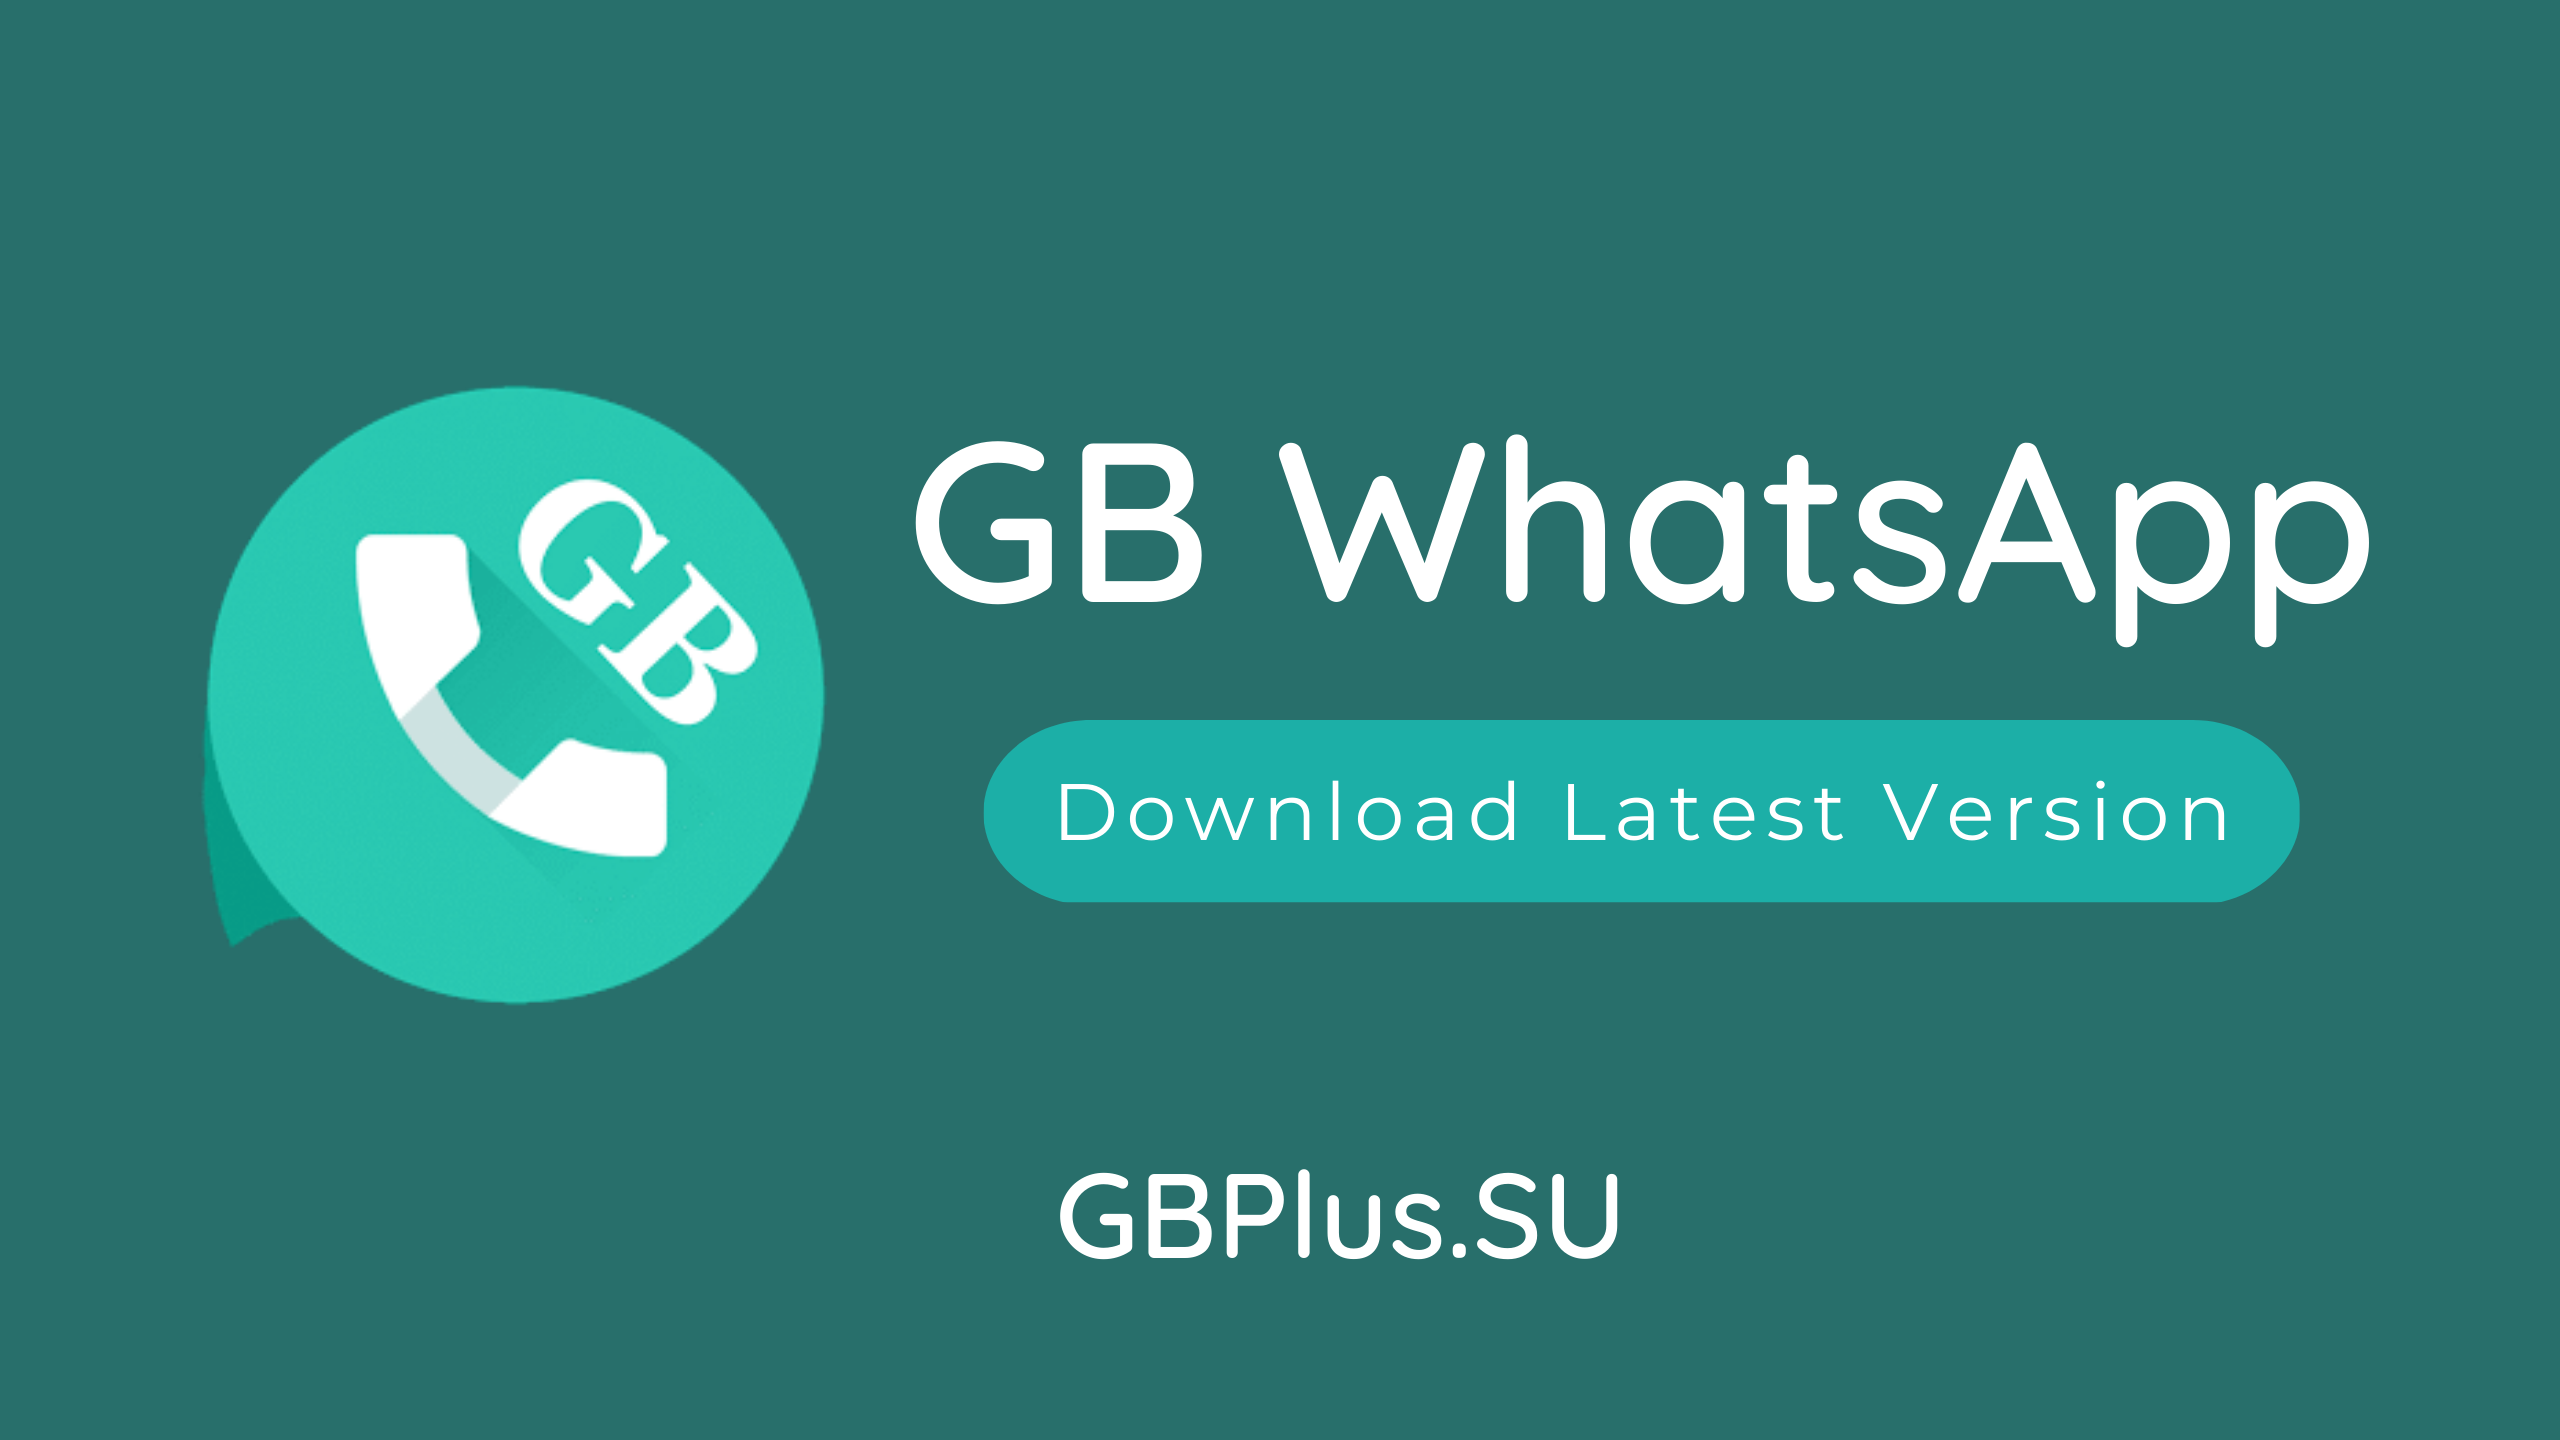 Discover GB WhatsApp, the Unofficial WhatsApp Mod that’s a Must-Have for You – and it’s Free to Download!